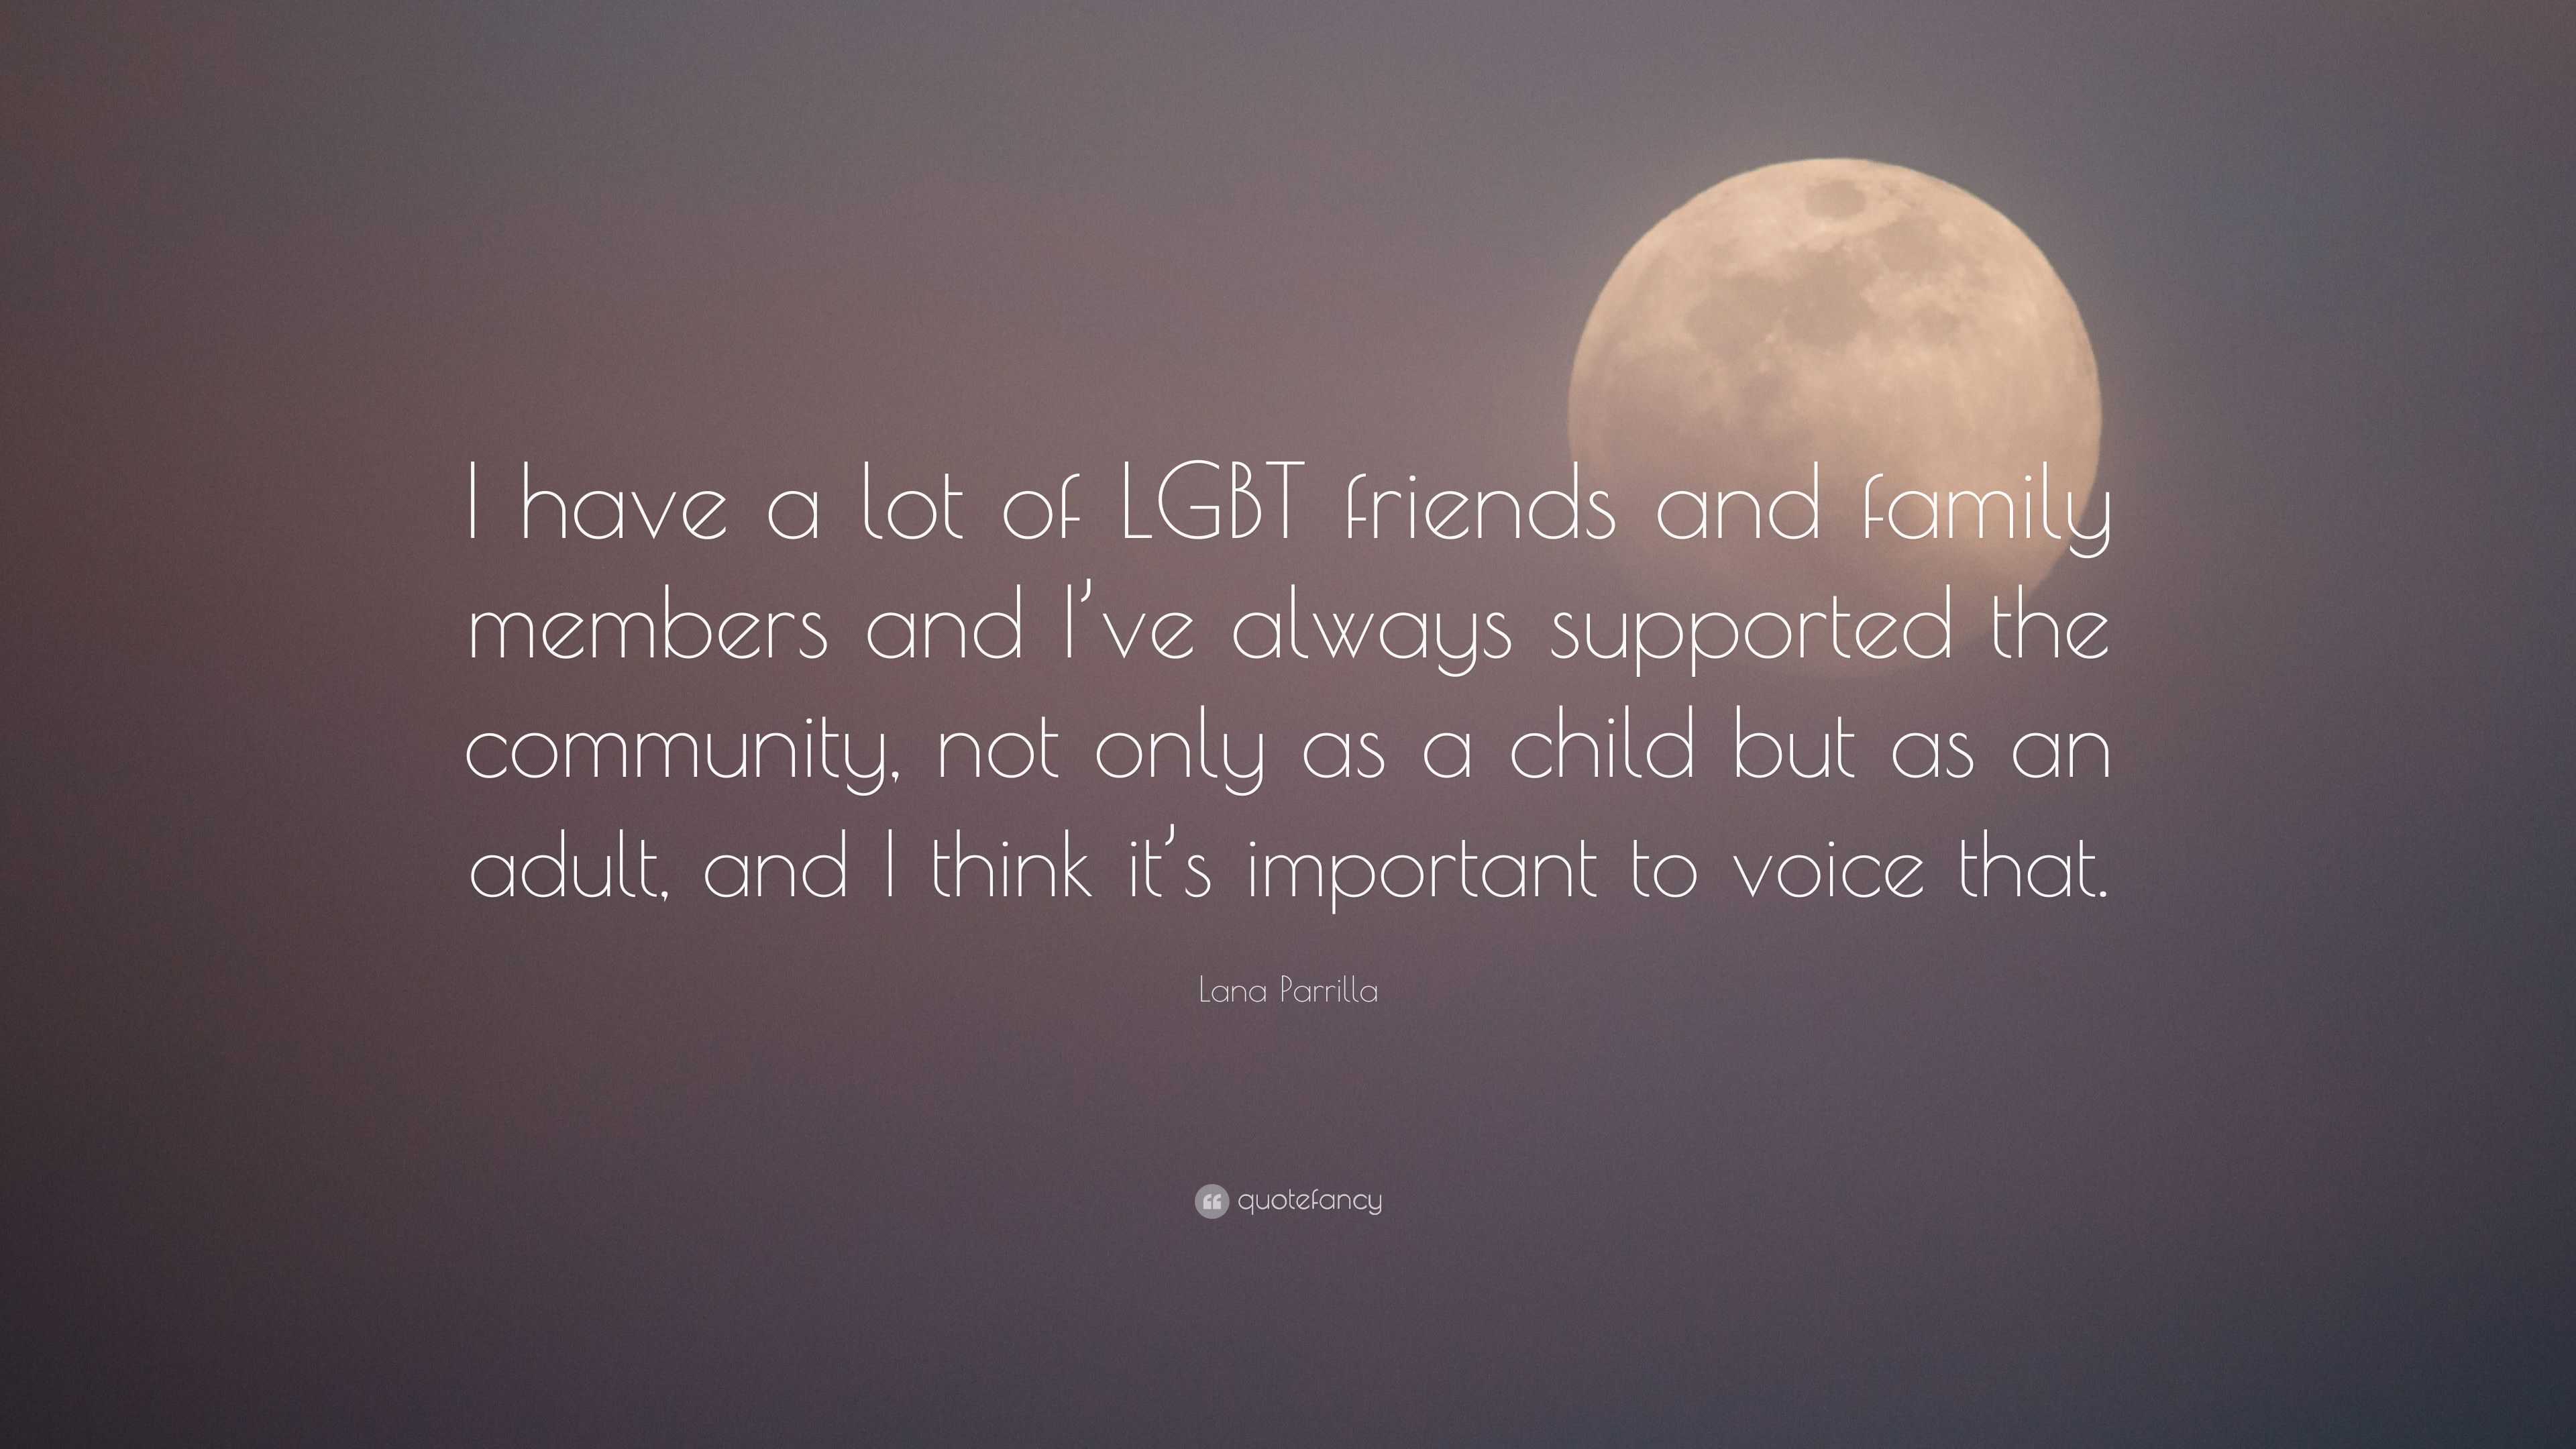 Lana Parrilla Quote I Have A Lot Of Lgbt Friends And Family Members And I Ve Always Supported The Community Not Only As A Child But As An A